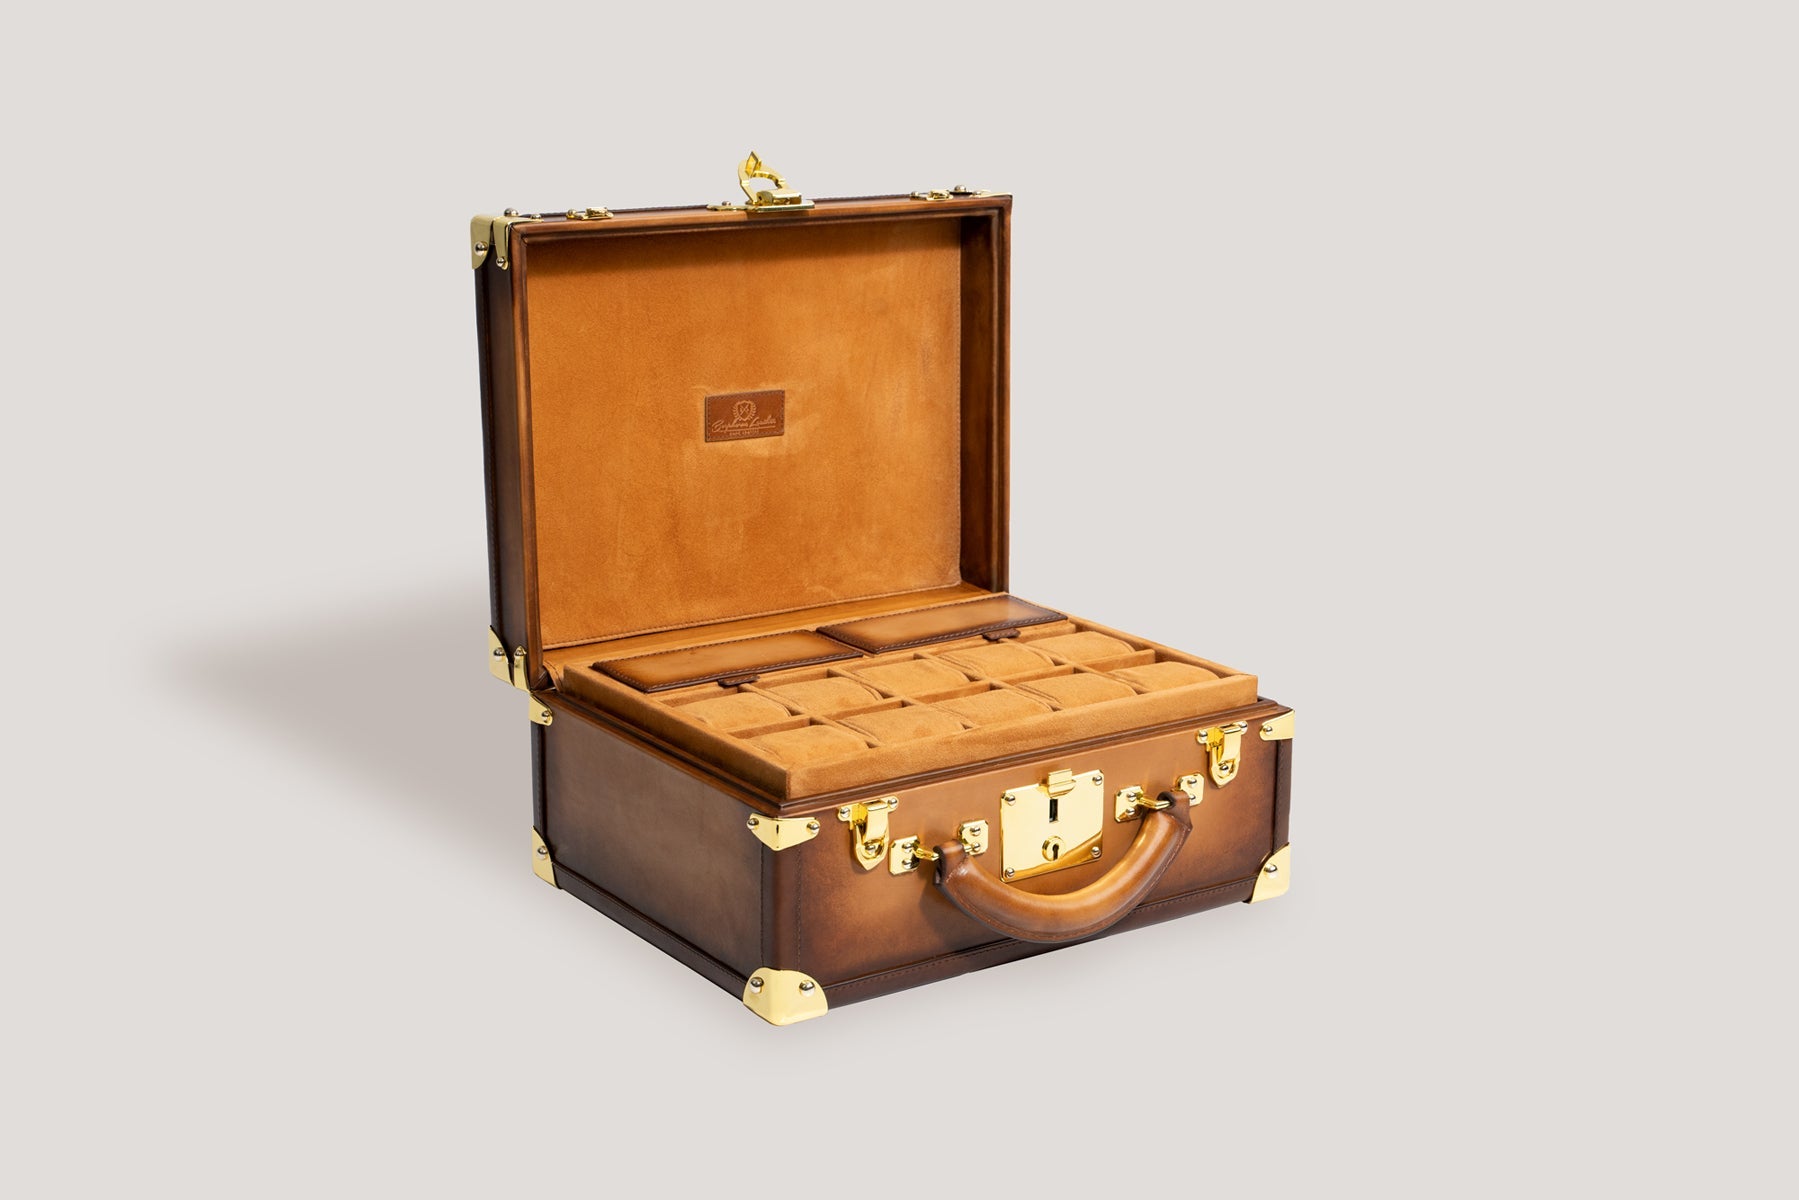 Bosphorus LeatherWatch Trunk - Patina Honey Brown for 25 Watches